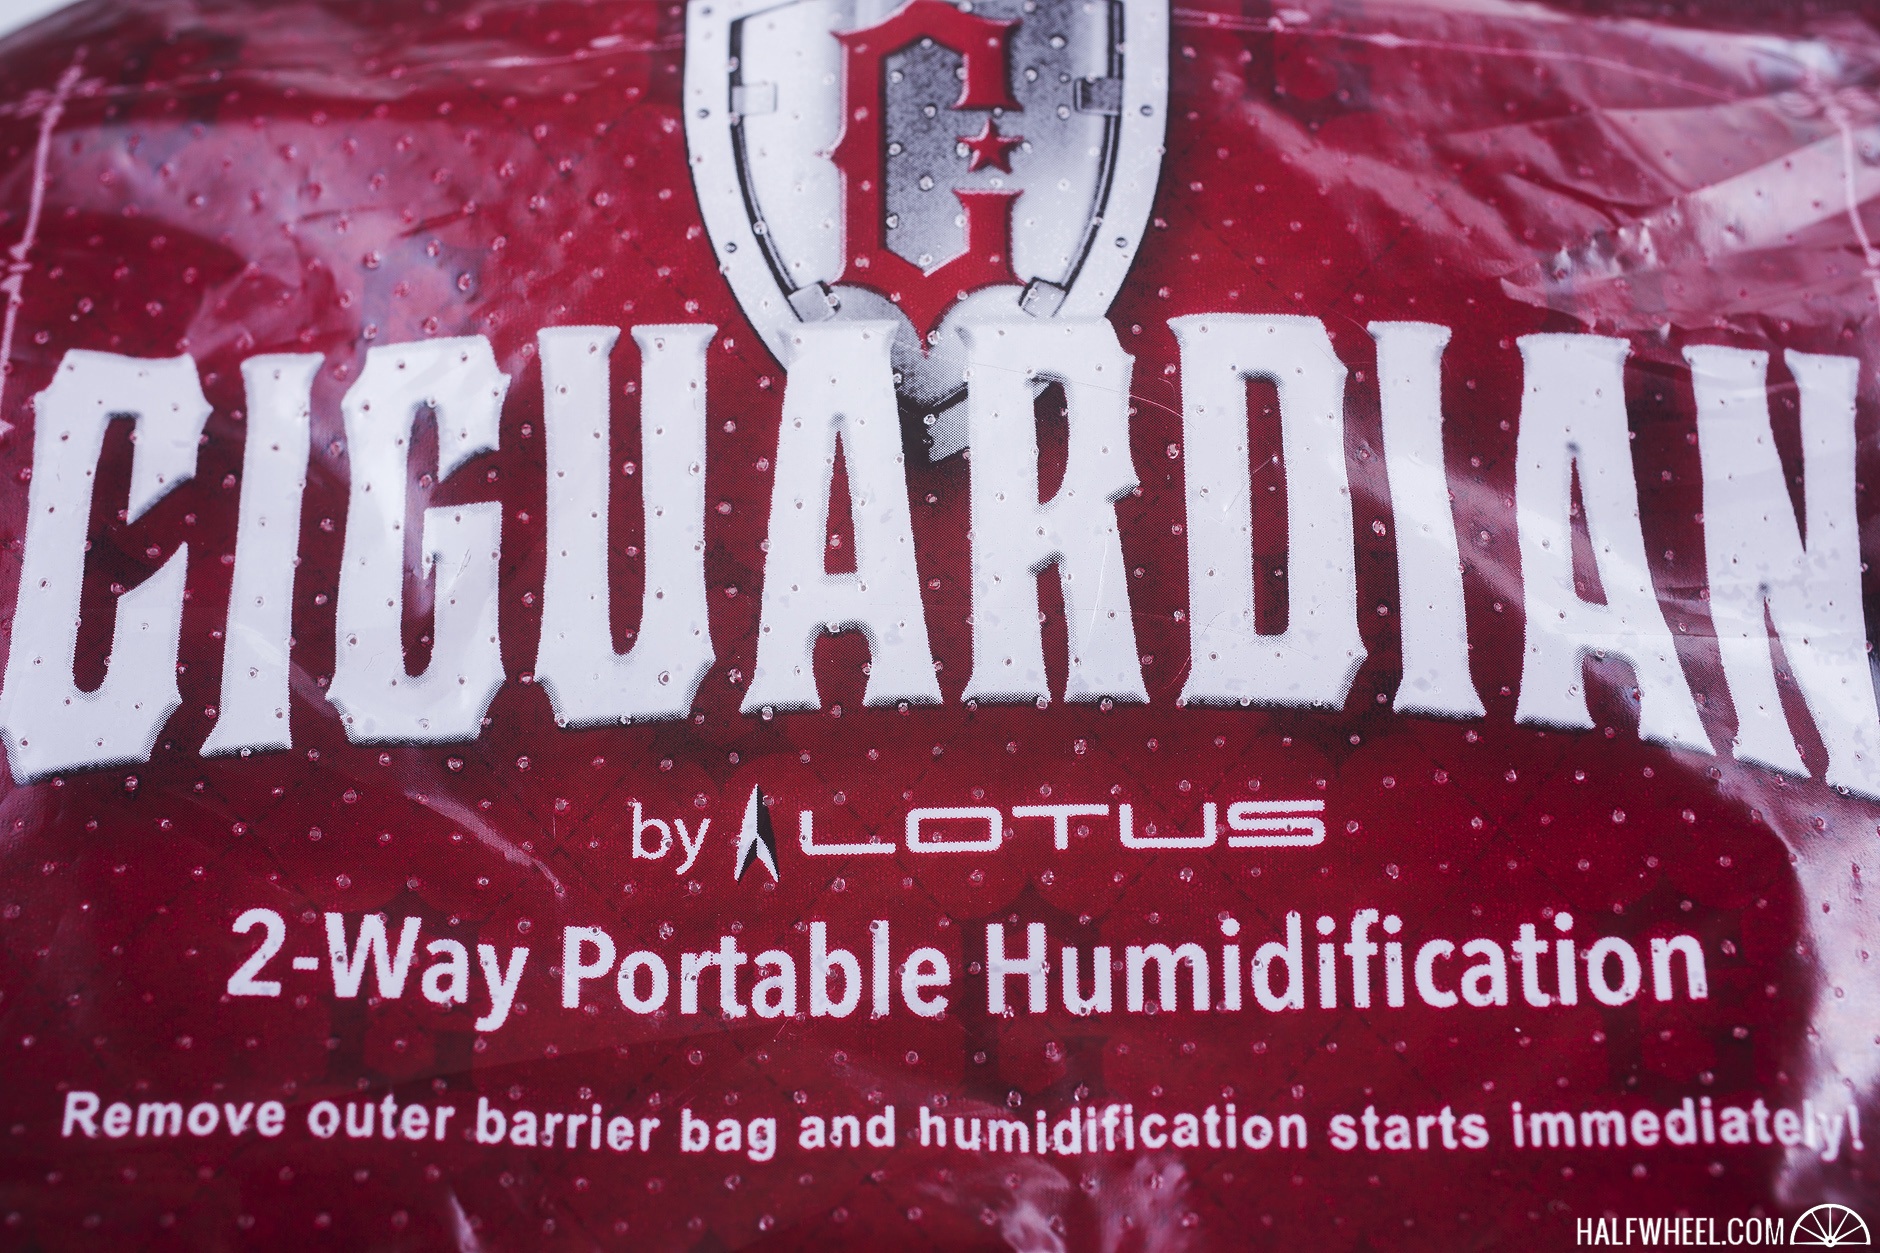 Ciguardian Humidification Pack feature